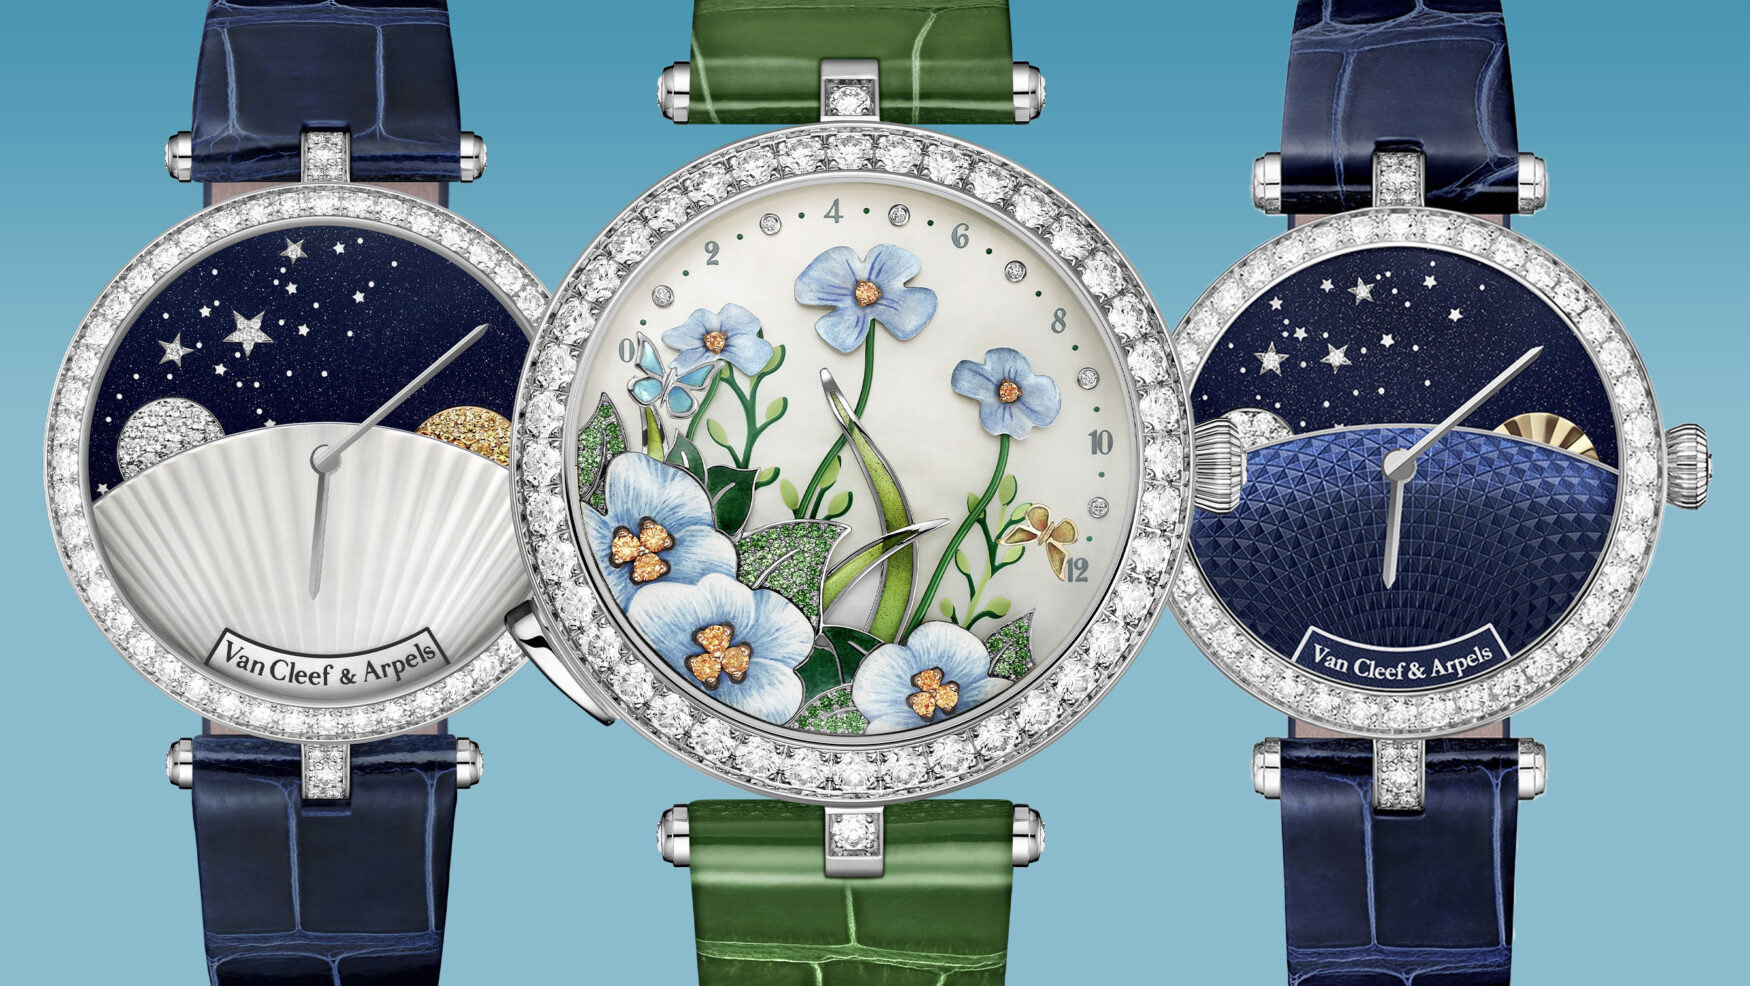 Van Cleef & Arpels captures the poetry of nature, timekeeping and luxury with their new collection